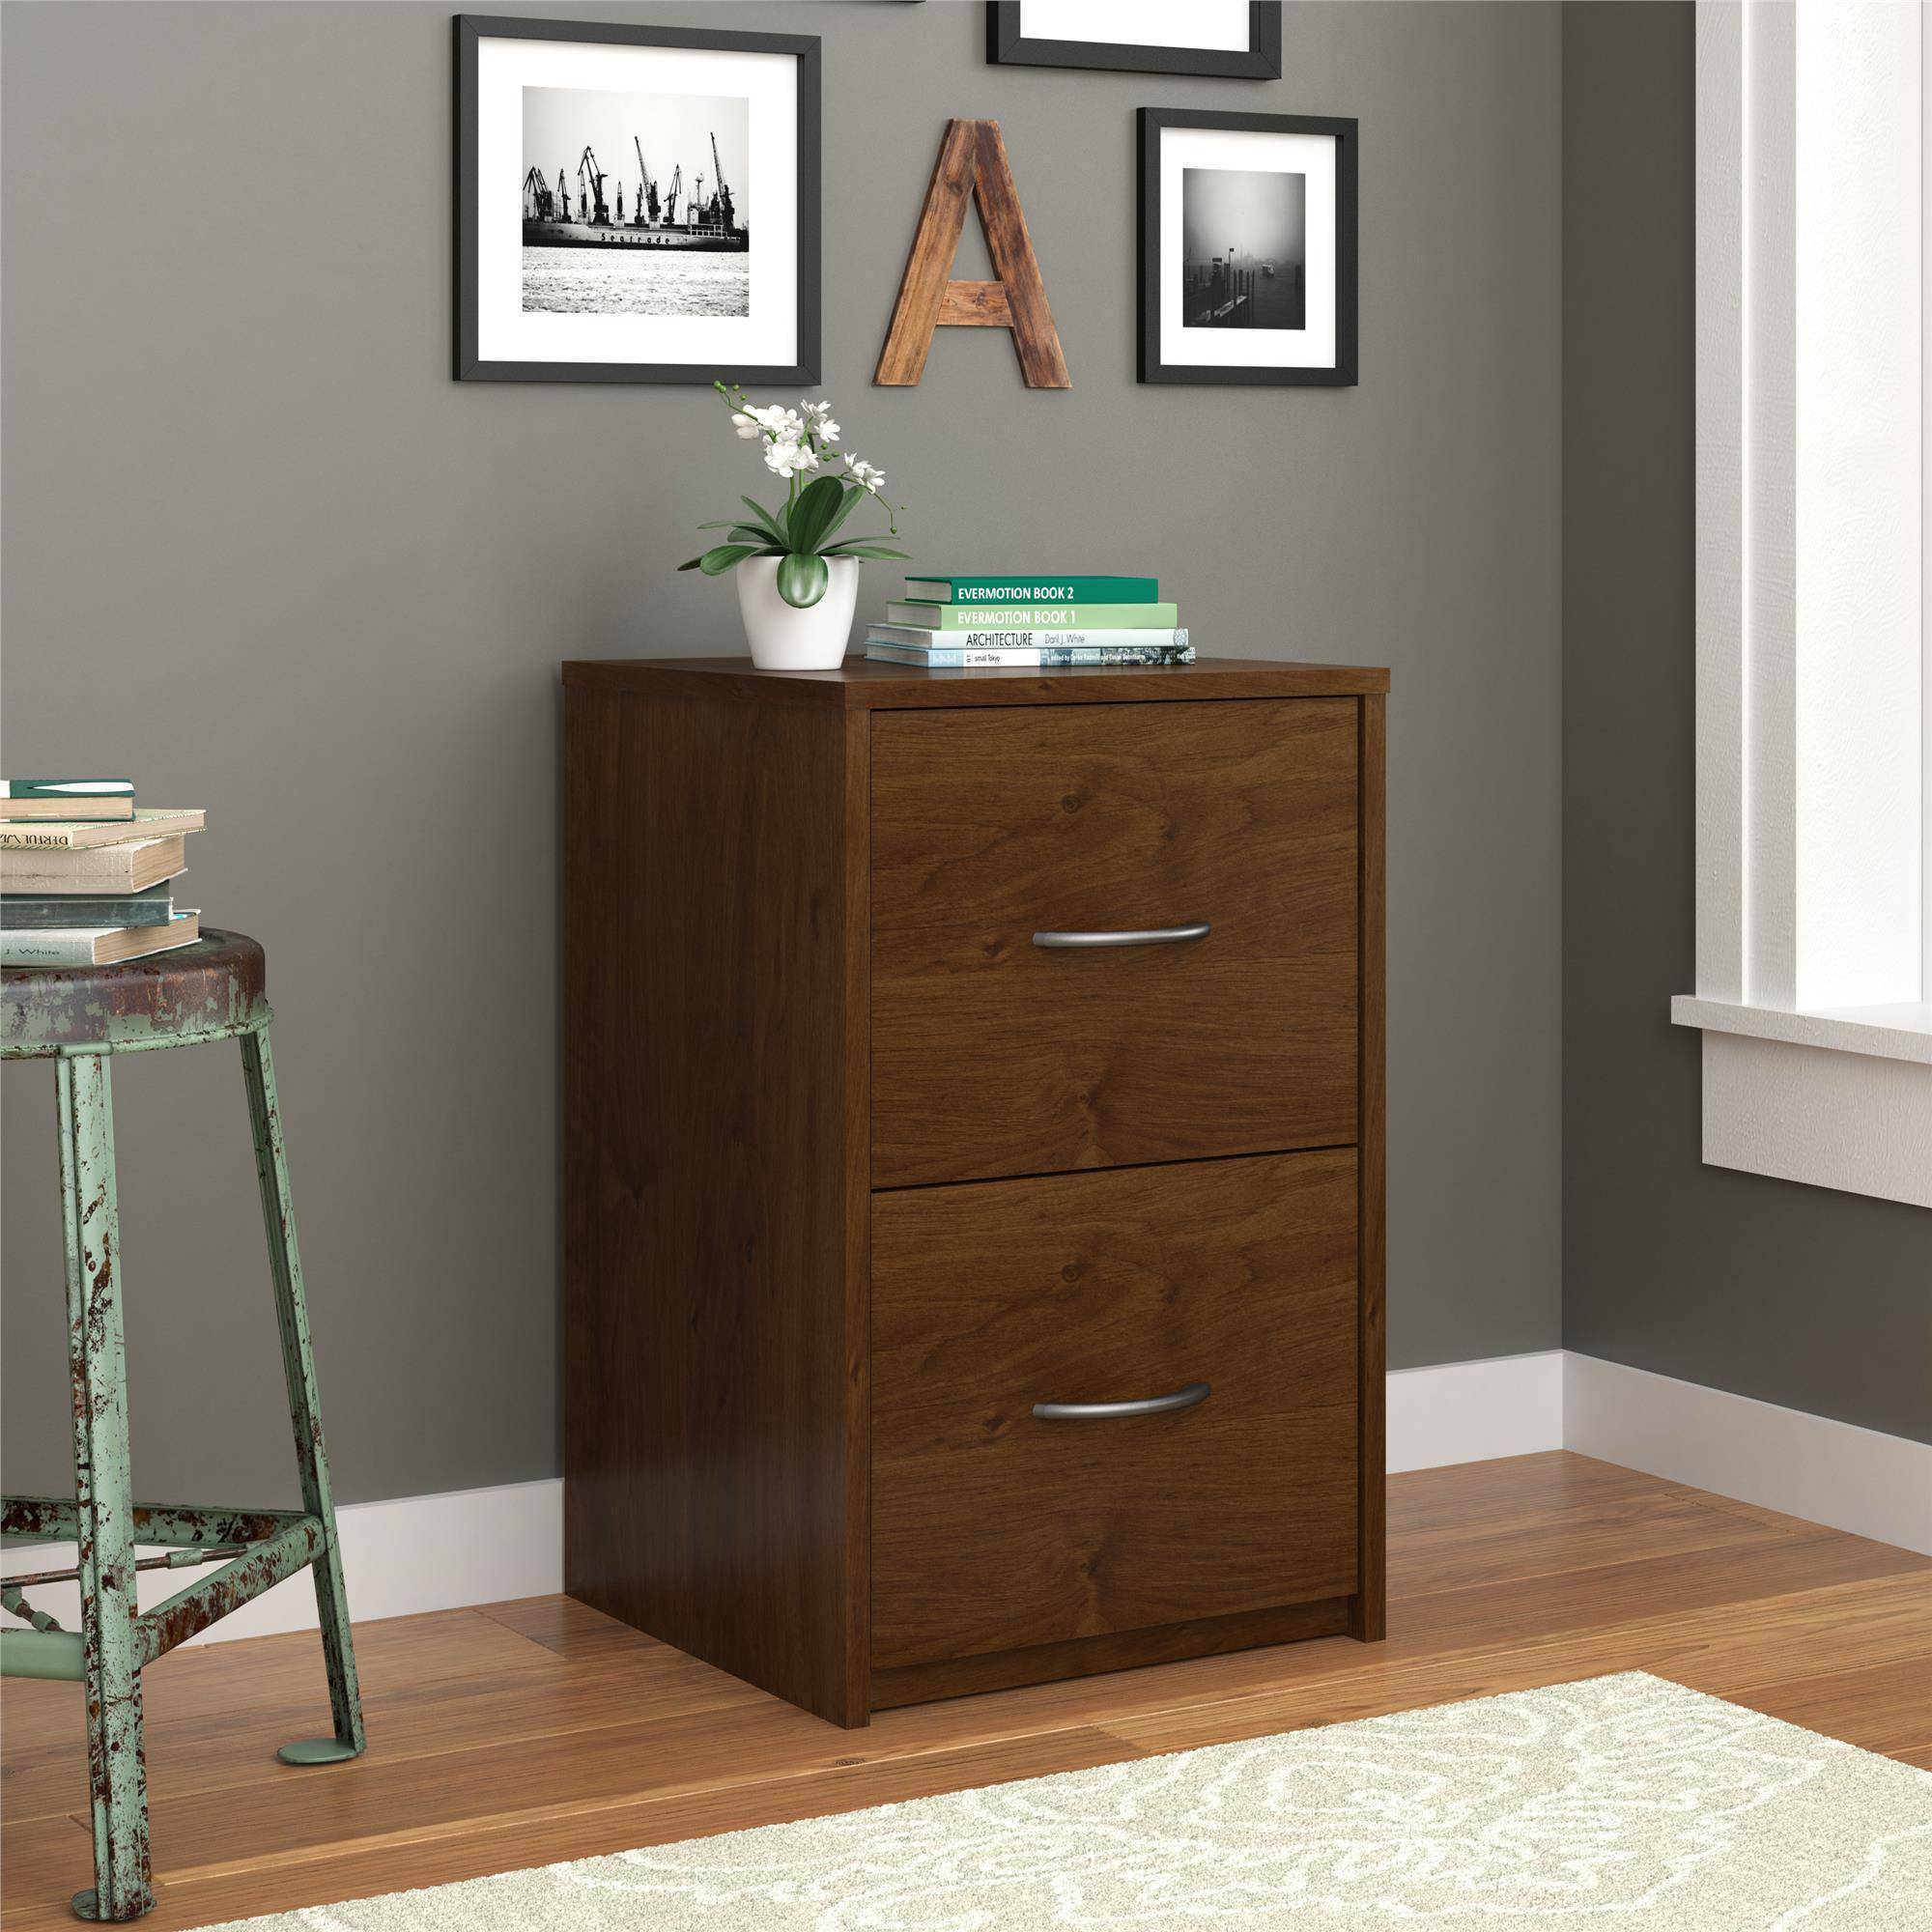 Bradley 4 Drawer Vertical Wood Filing Cabinet Black Walmart within proportions 2000 X 2000